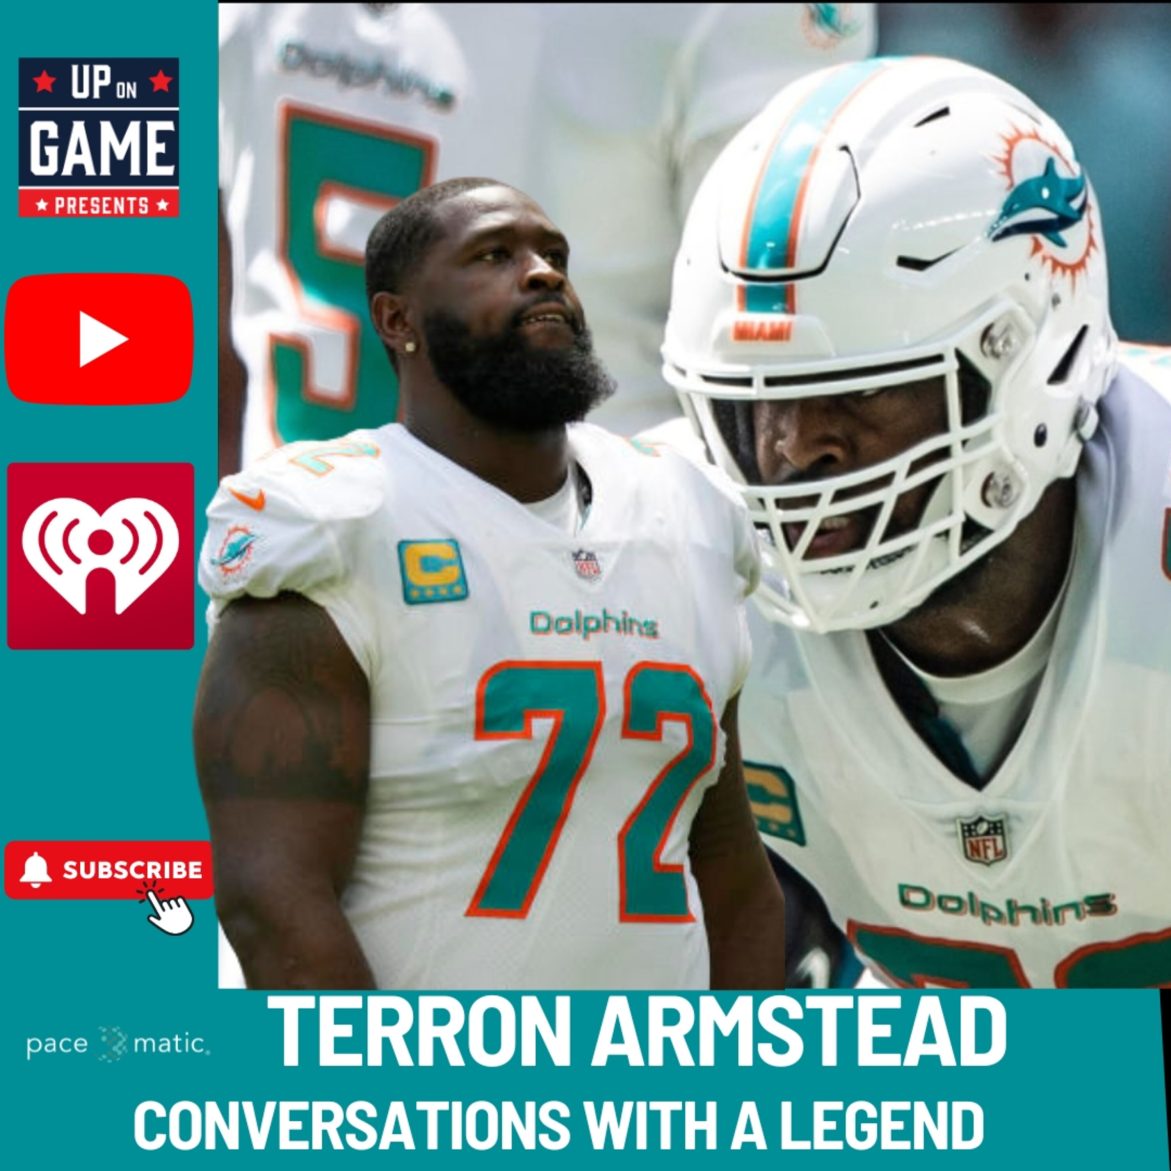 Black Podcasting - Up On Game Presents Conversations With A Legend With LaVar Arrington Featuring Dolphins LT Terron Armstead "New School Vs Old School"